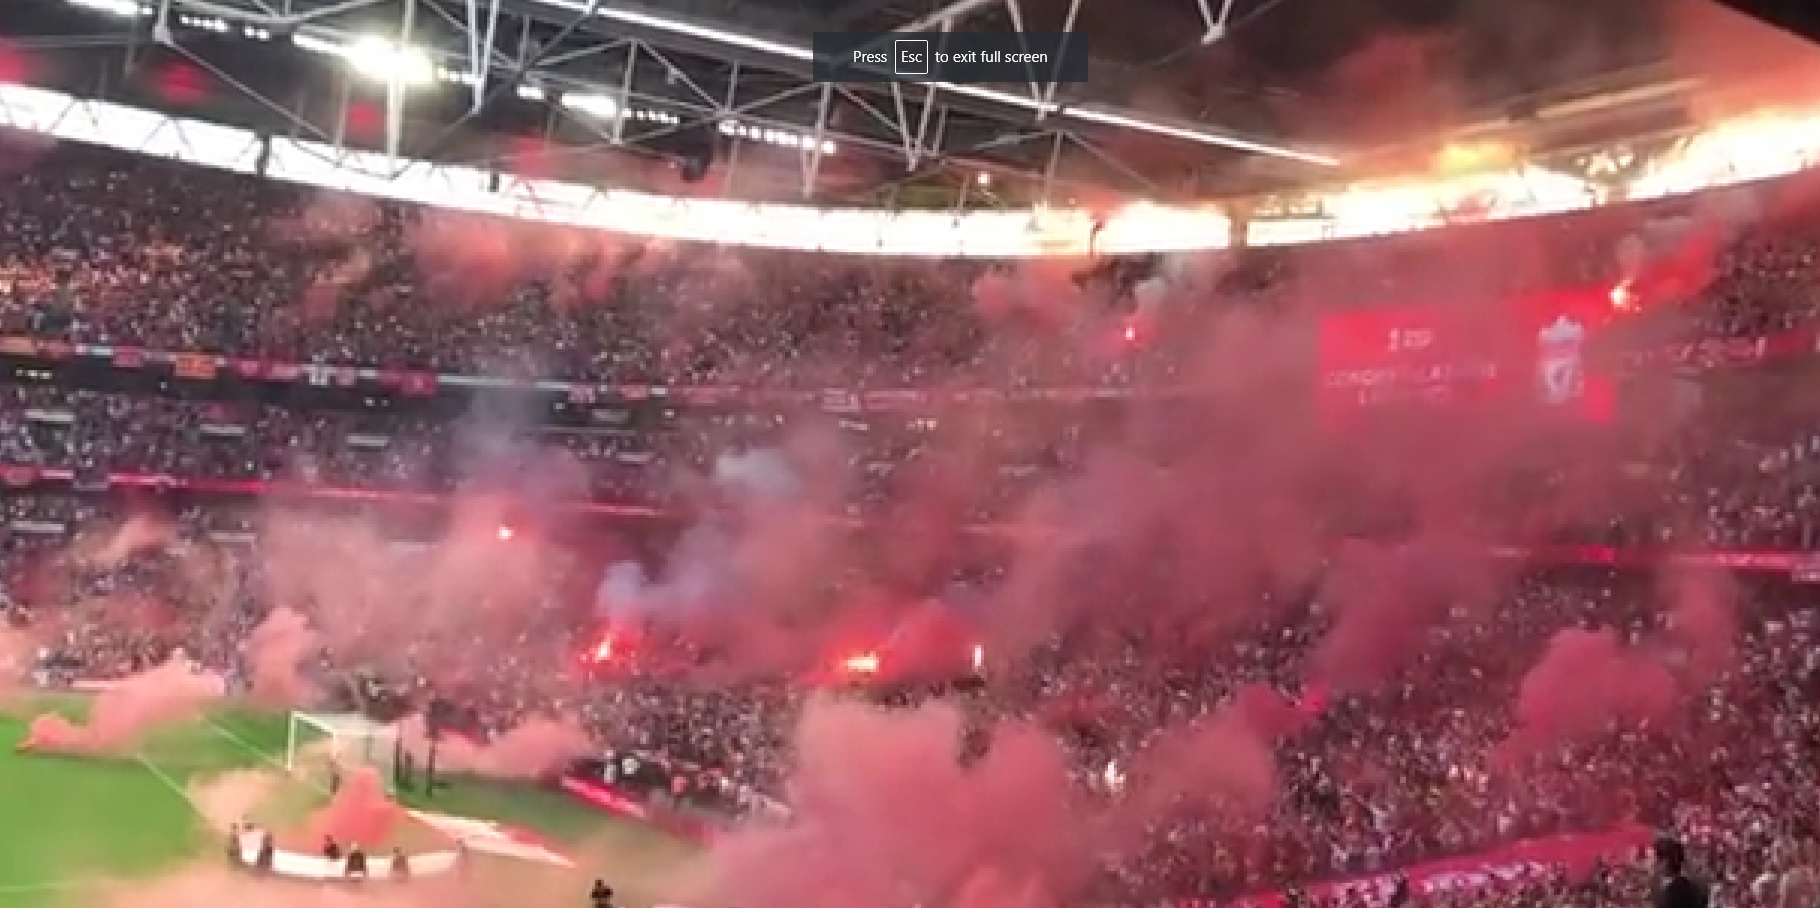 (Video) Unbelievable scenes at Wembley as red haze of flare smoke covers Liverpool fan section after FA Cup win